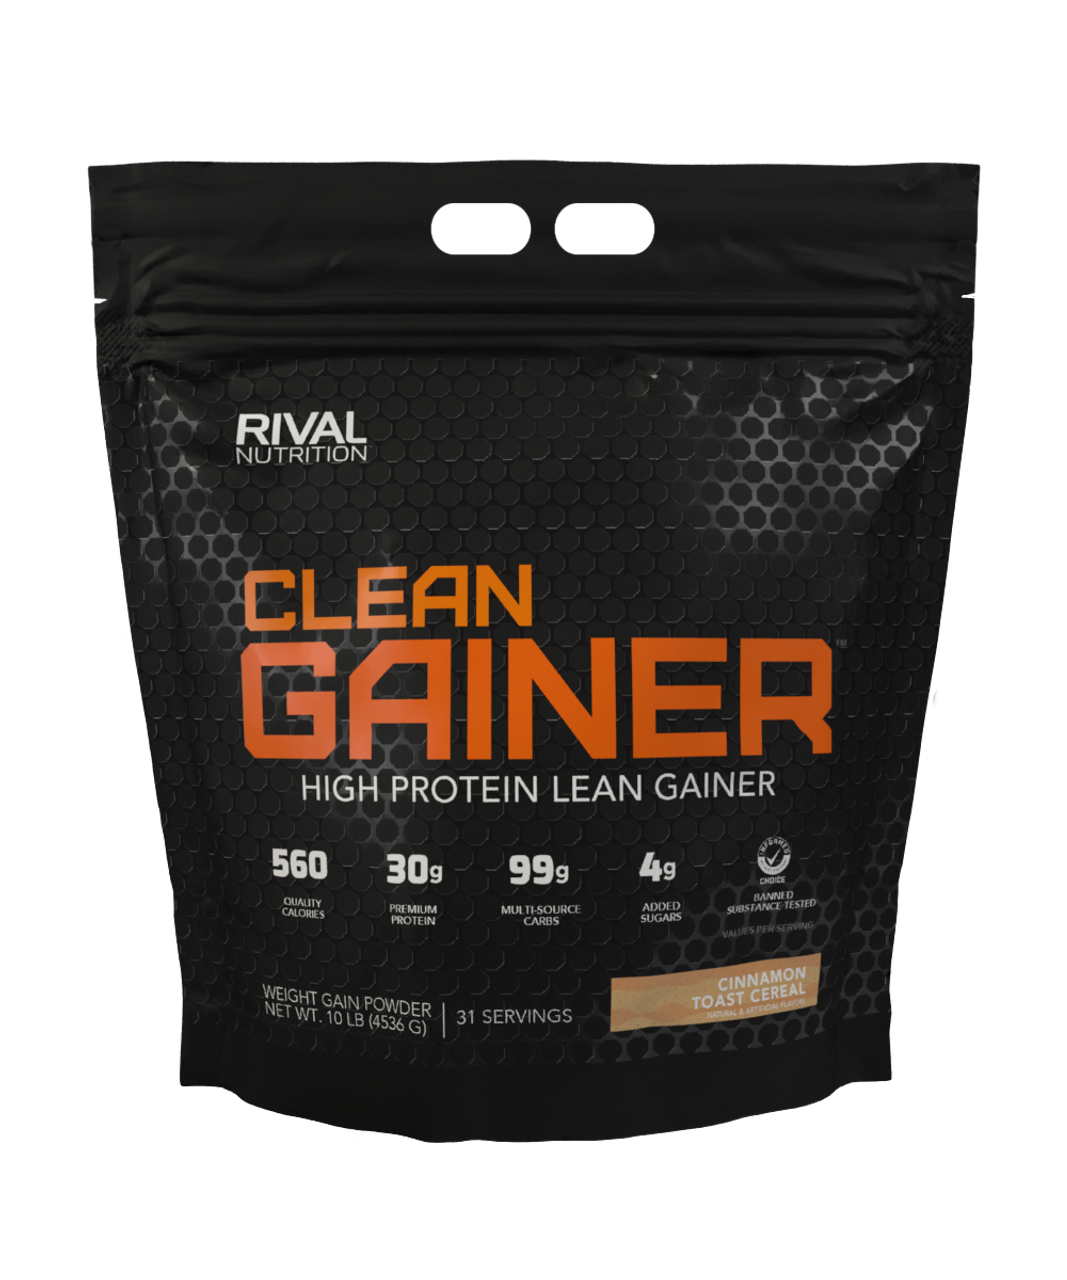 Clean Gainer by Rival Nutrition